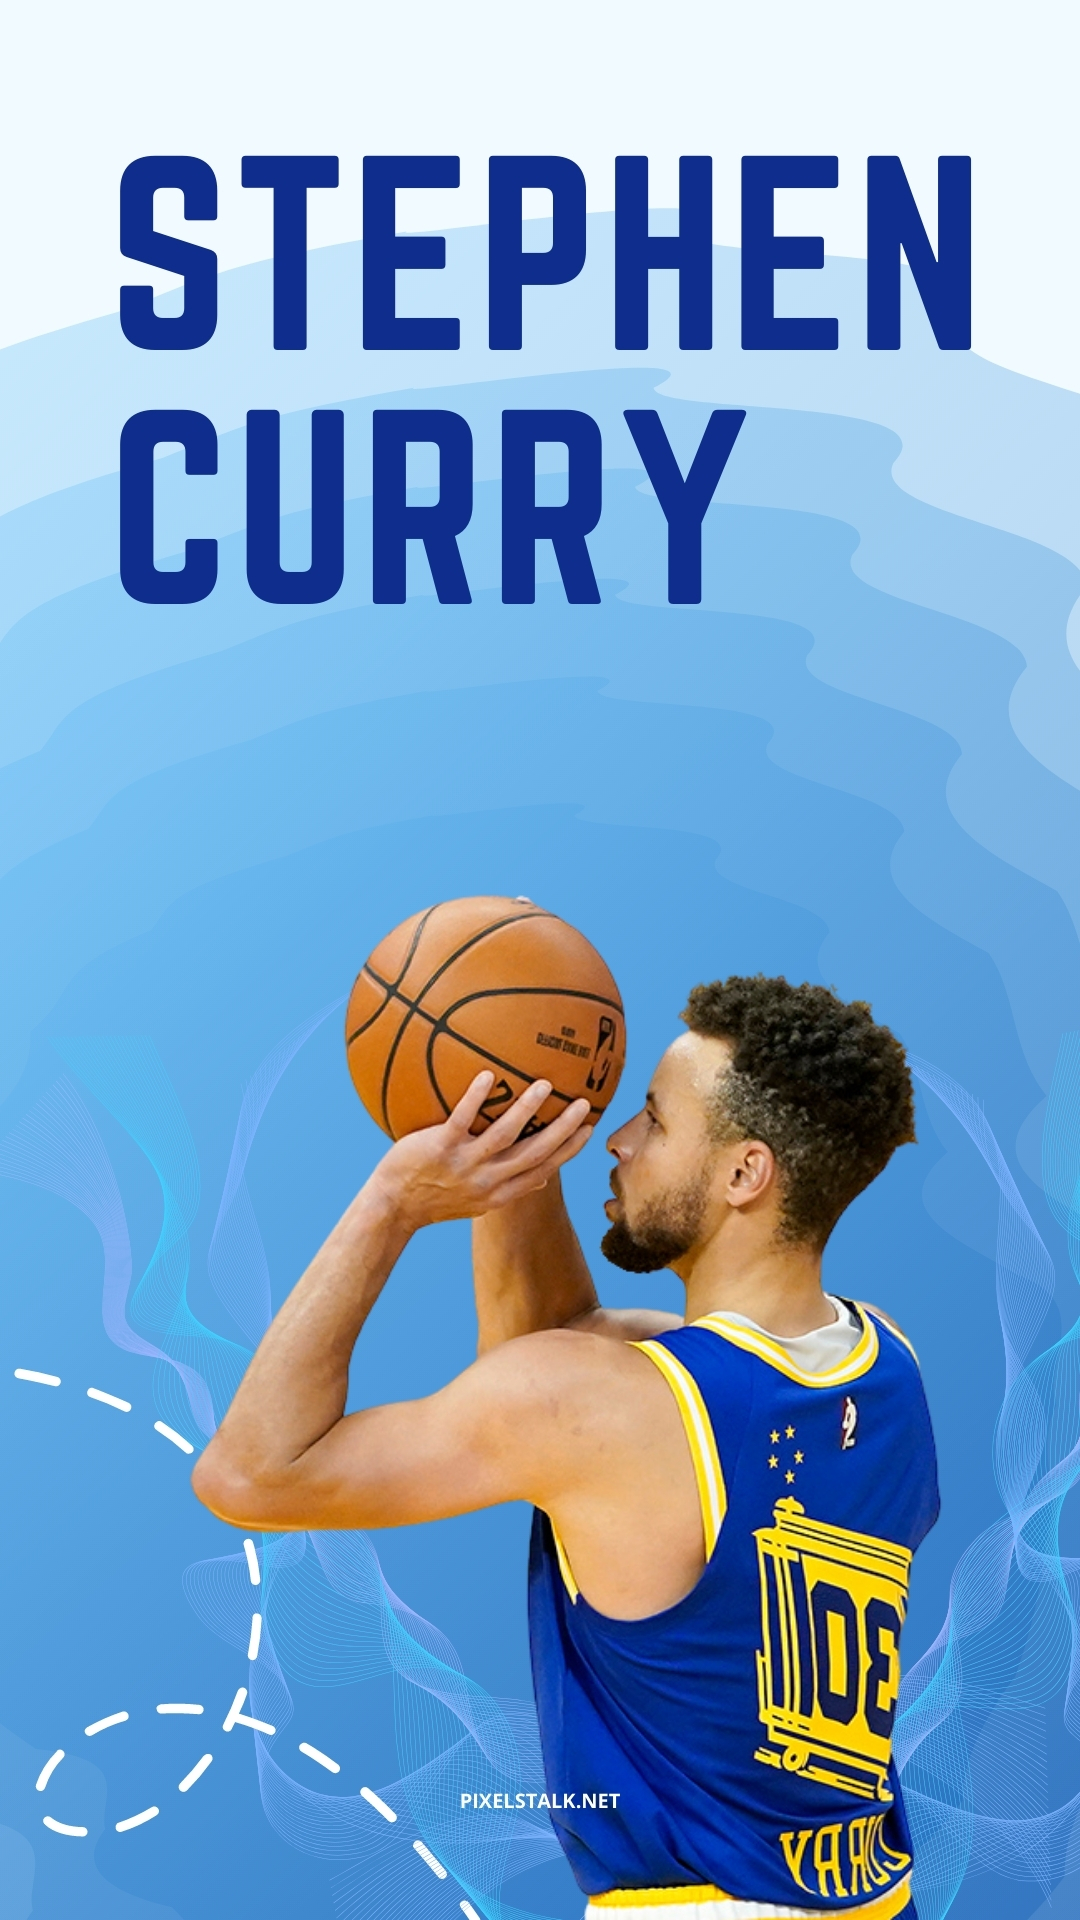 Stephen Curry wallpaper free download